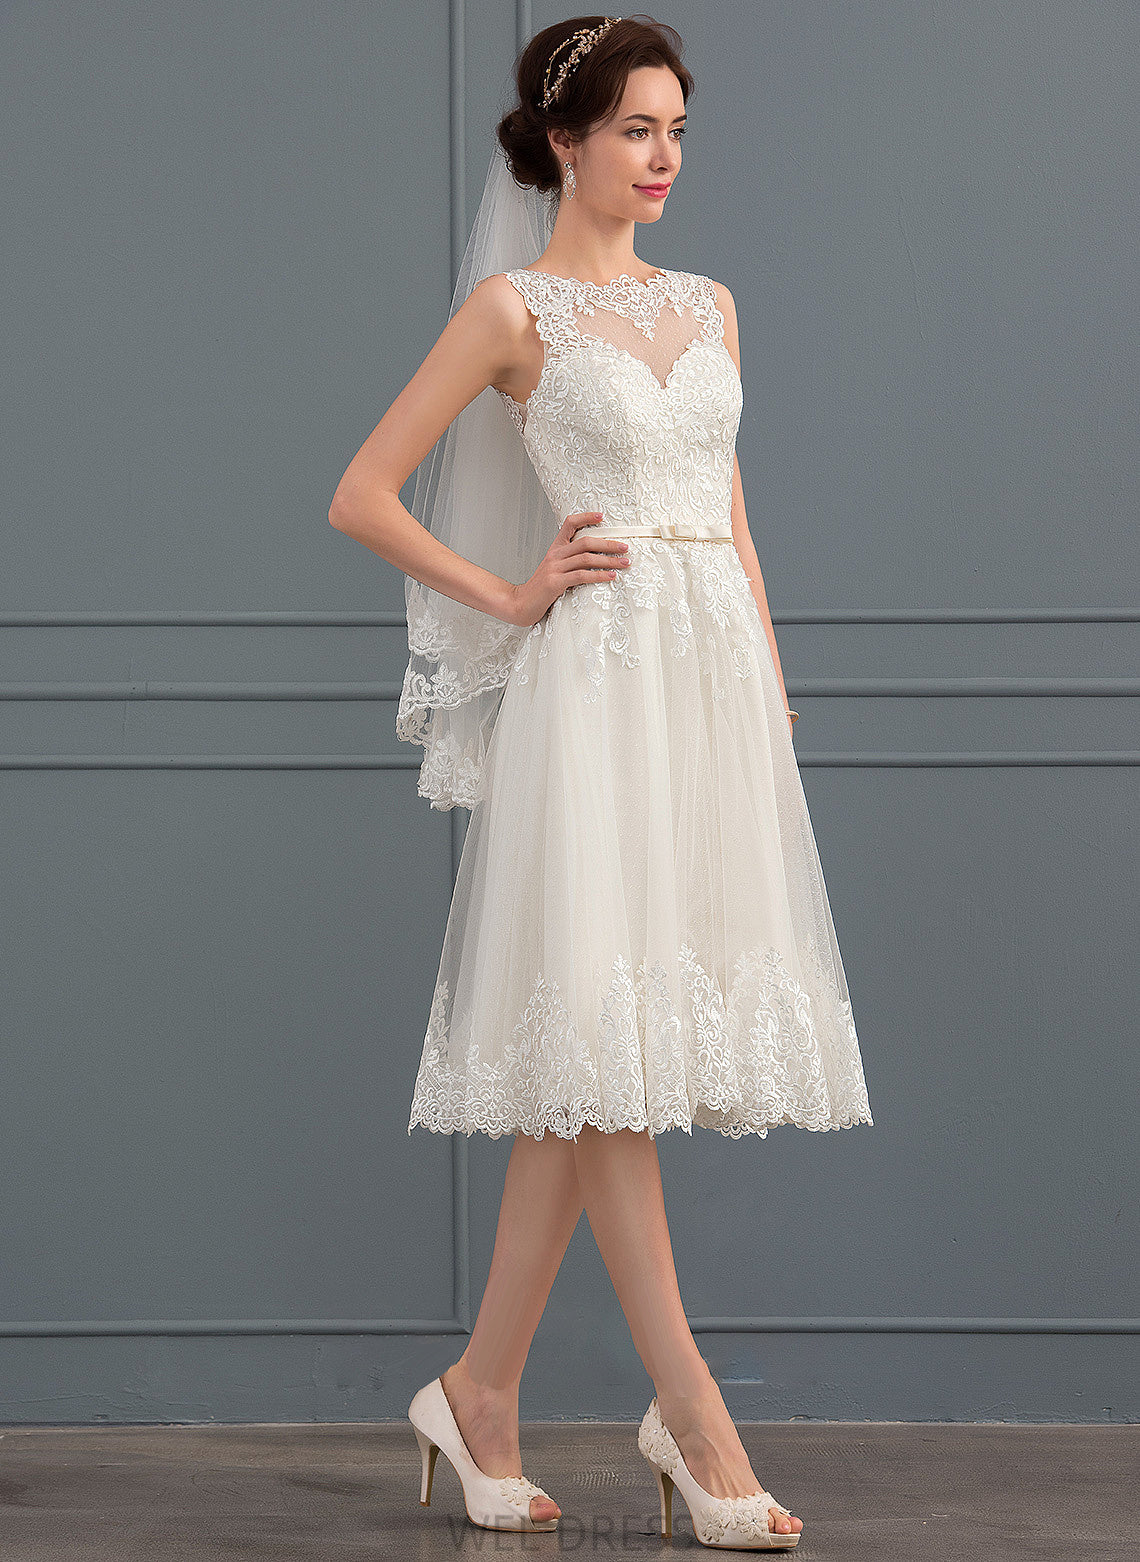 Bow(s) Megan Knee-Length With Illusion A-Line Tulle Wedding Wedding Dresses Dress